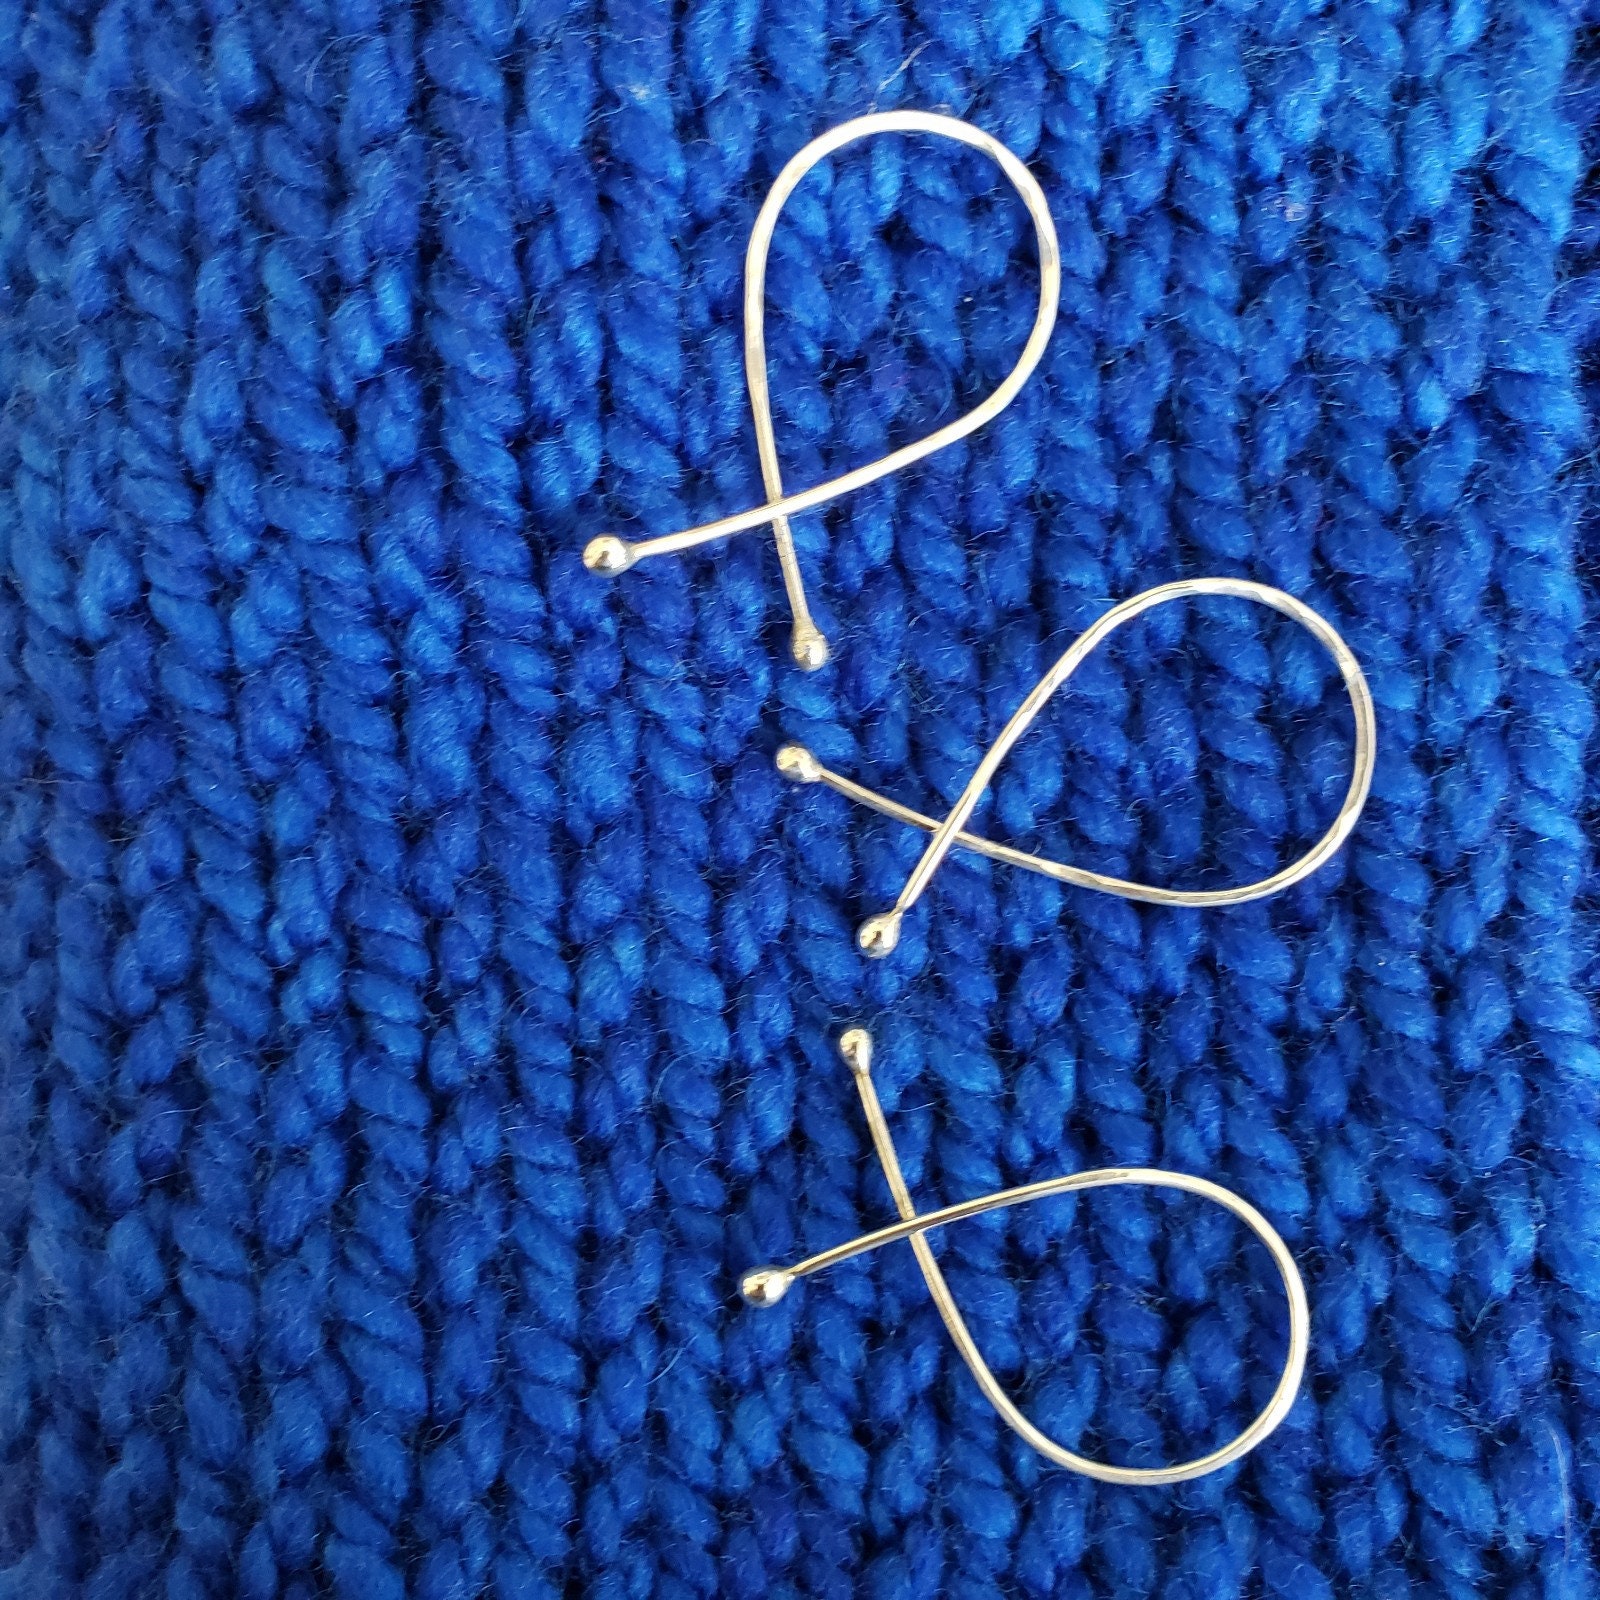 Little Set of Sterling Silver Stitch Markers for Knitting and Crochet